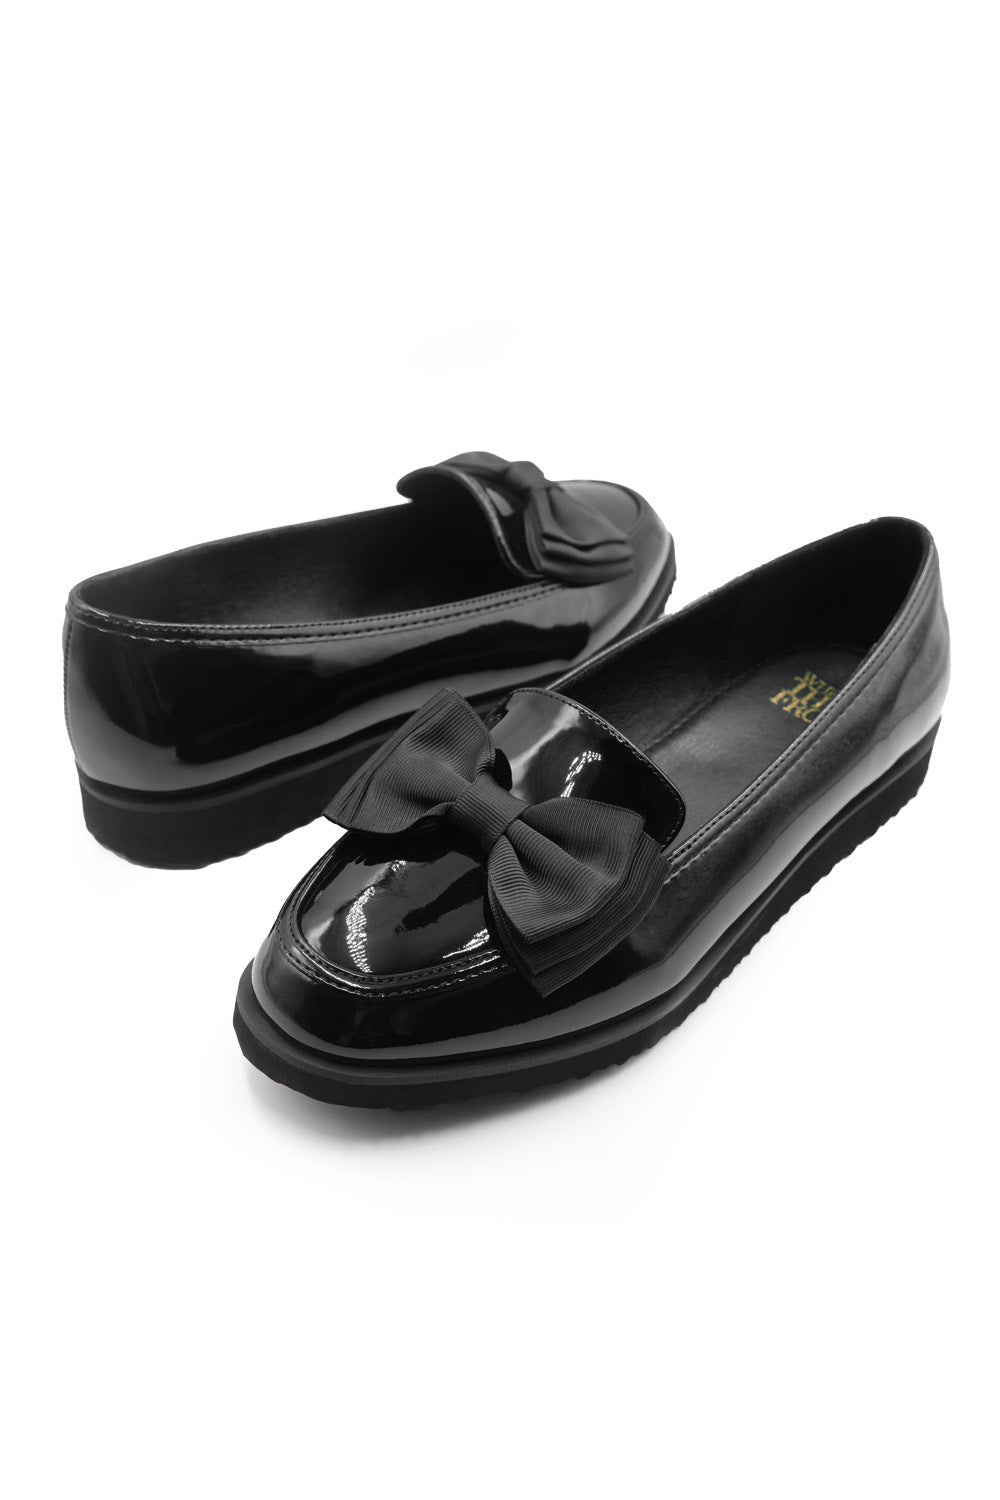 ALPHA WIDE FIT SLIP ON LOAFER SLIDER WITH BOW DETAIL IN BLACK PATENT FAUX LEATHER